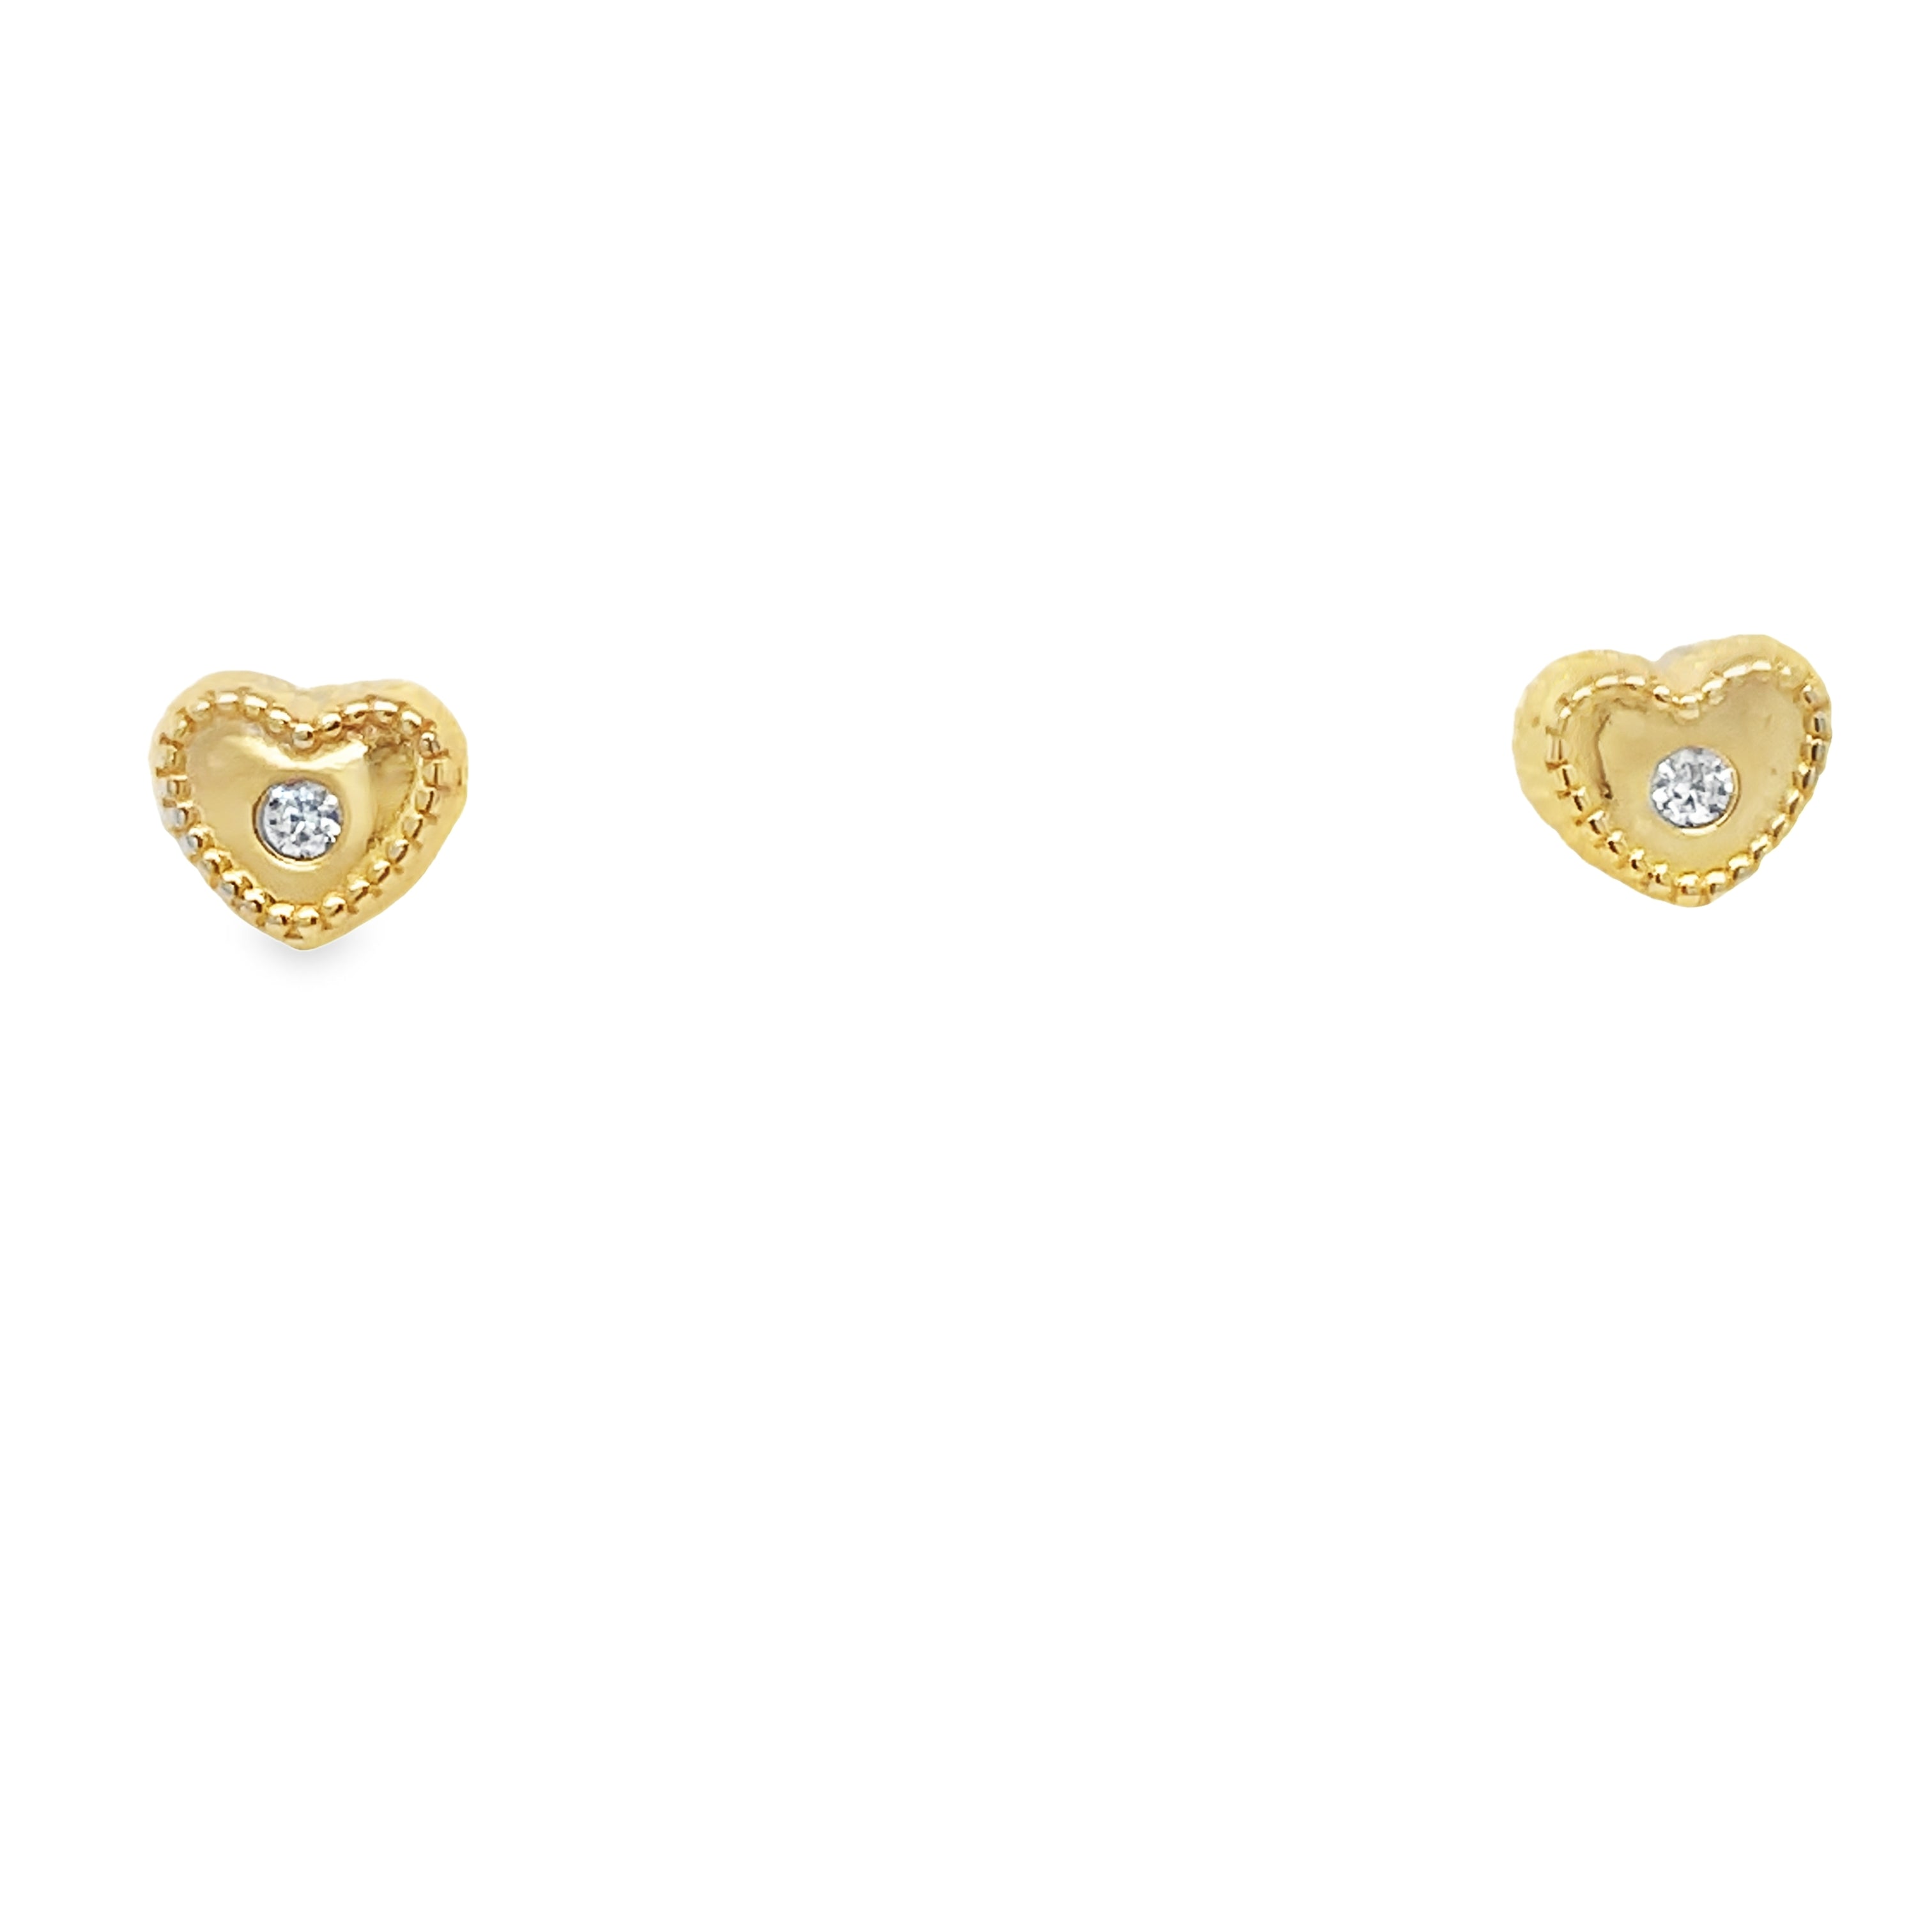 <p><span style="font-size: 0.875rem;">These exquisite flower earrings for babies feature 14k yellow gold construction with heart shape securely affixed using baby screw backs.</span></p> <p>&nbsp;</p>